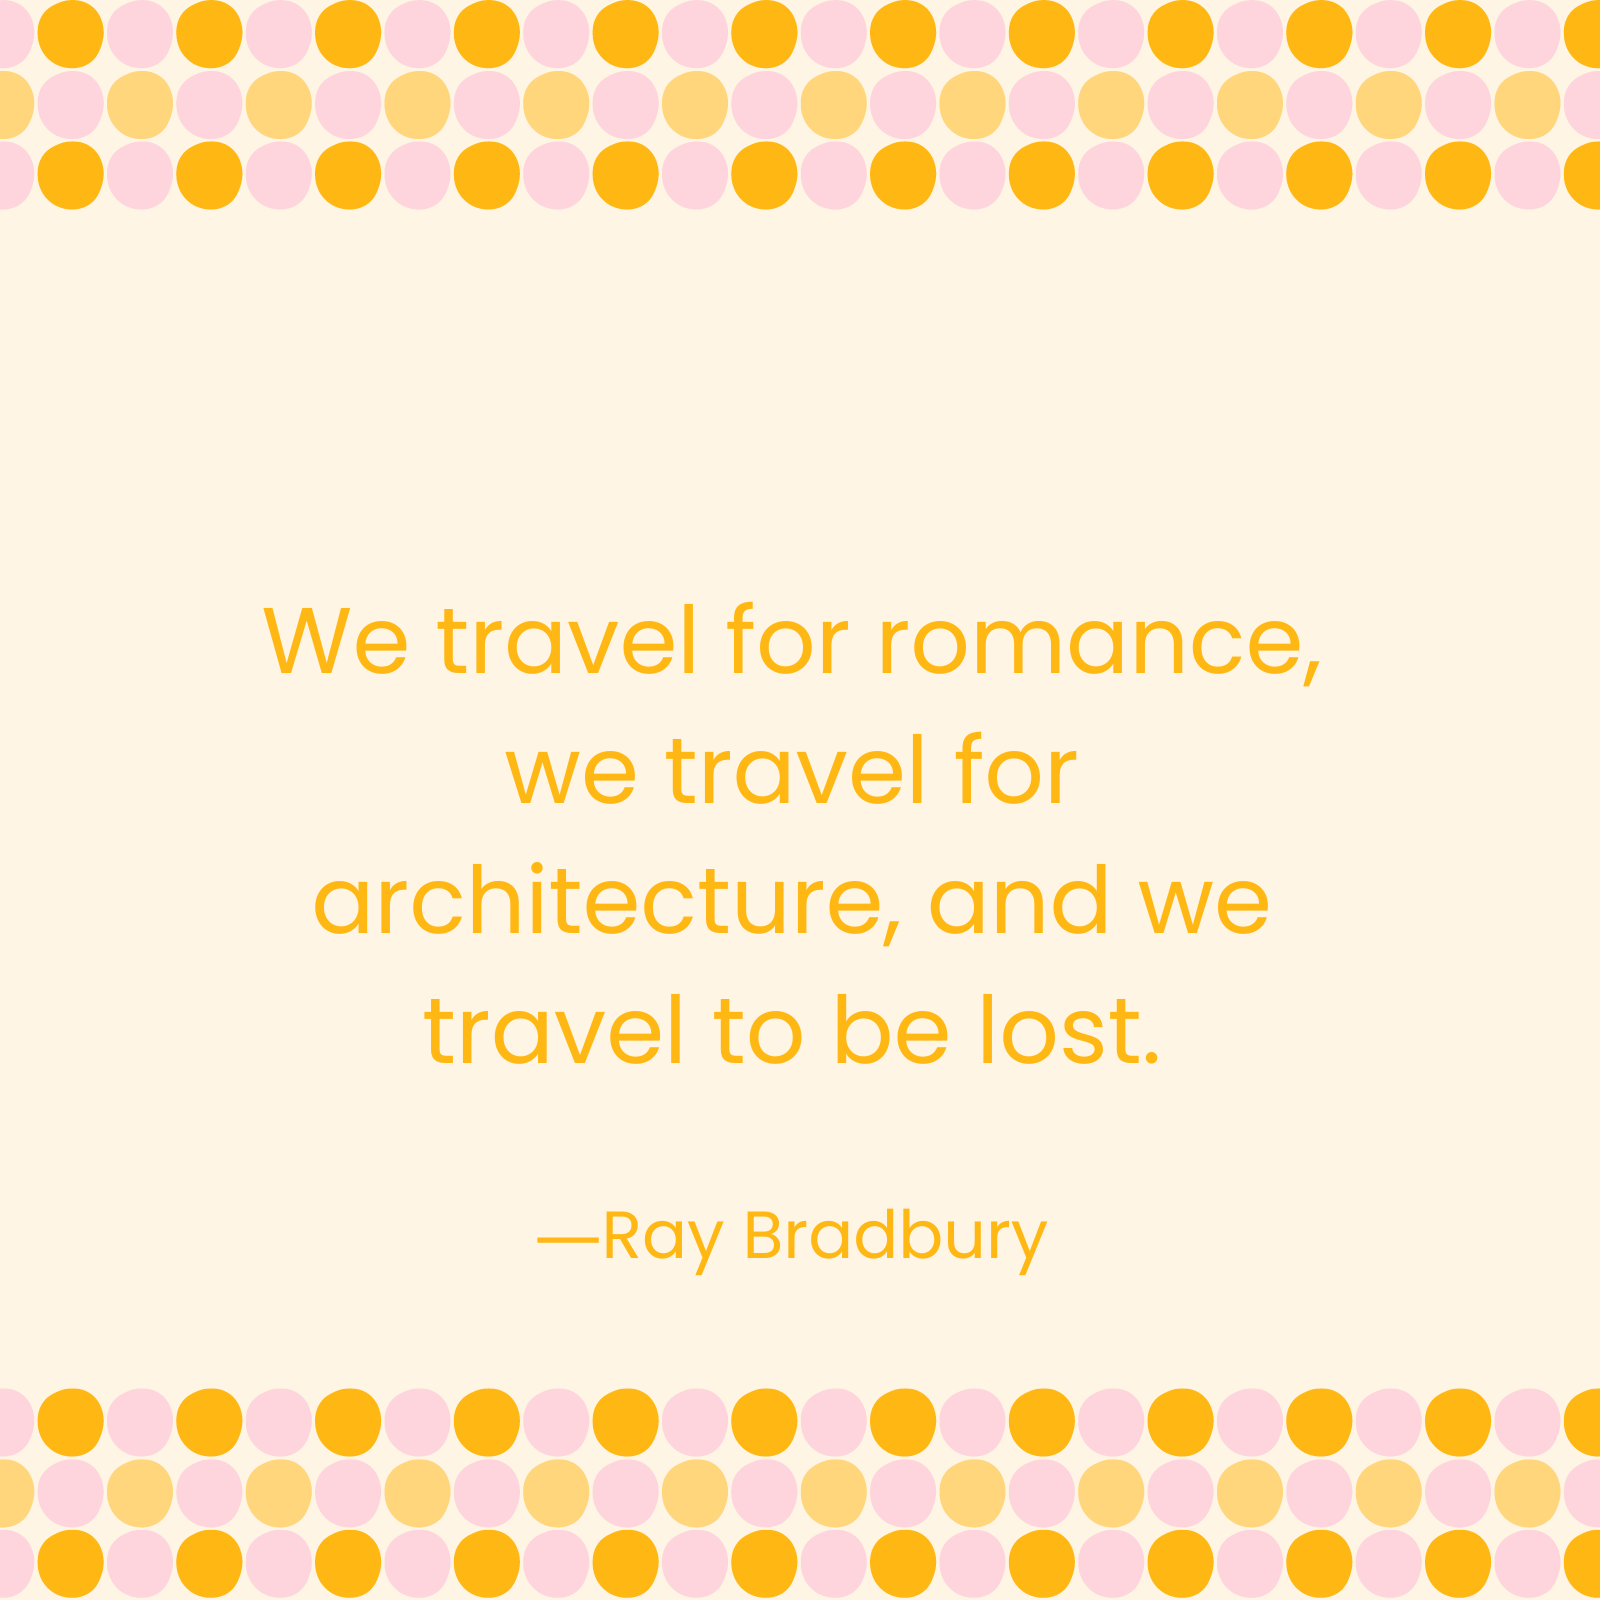 <p>"We travel for romance, we travel for architecture, and we travel to be lost." </p>